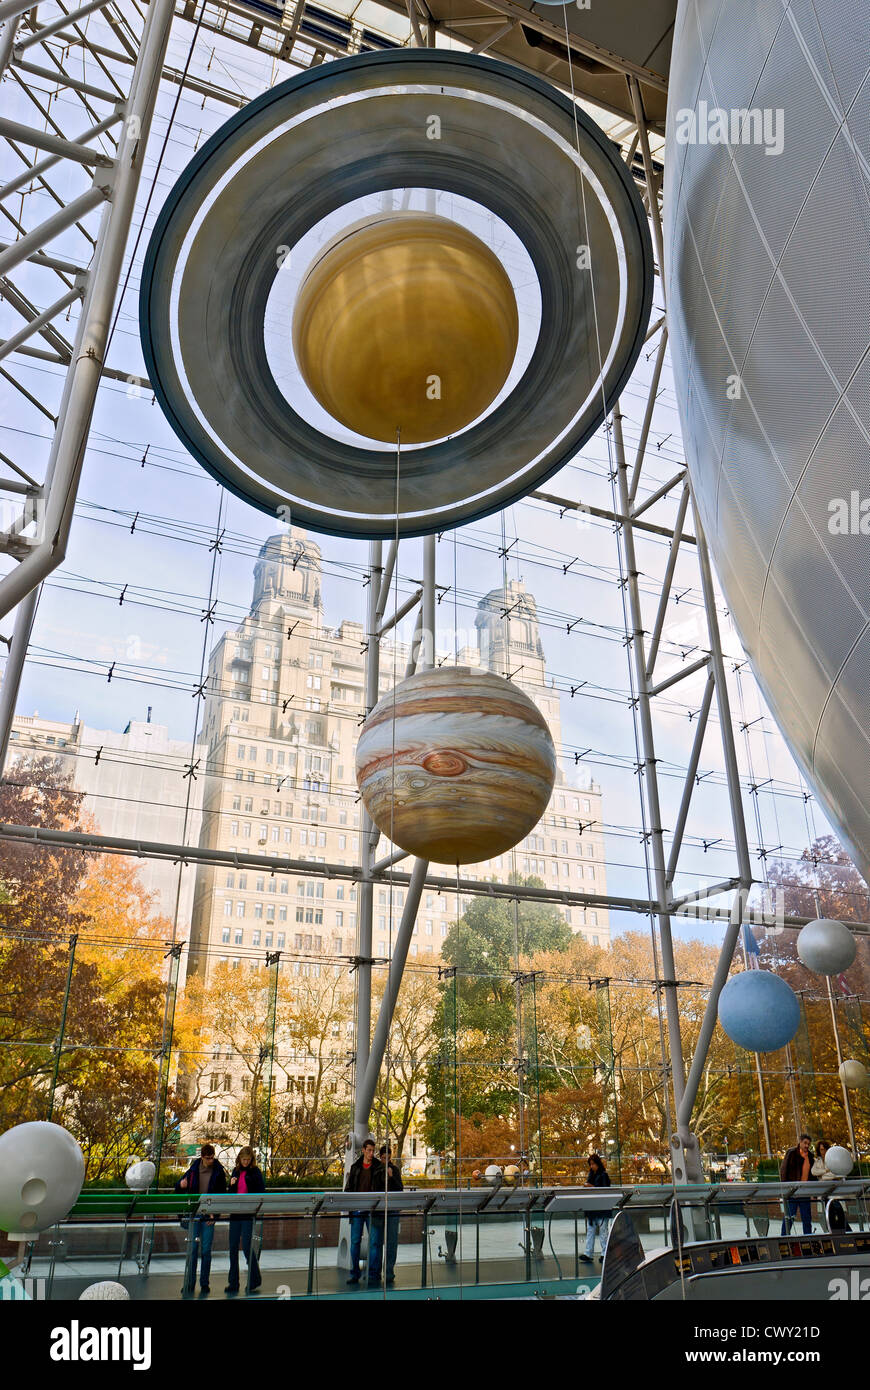 American Museum of Natural History, Rose Center for Earth and Space in New York City. Stockfoto